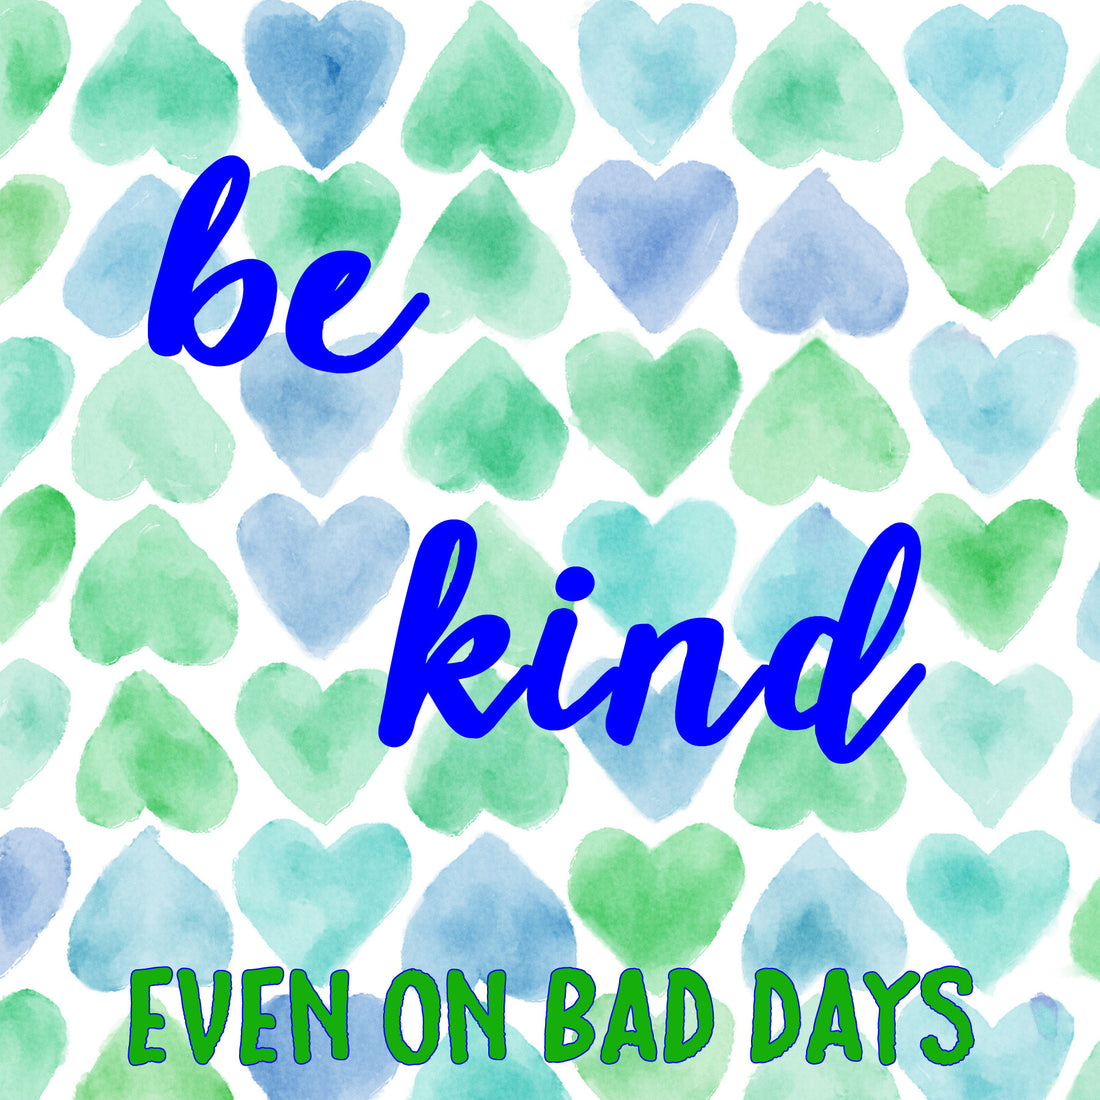 Be Kind!